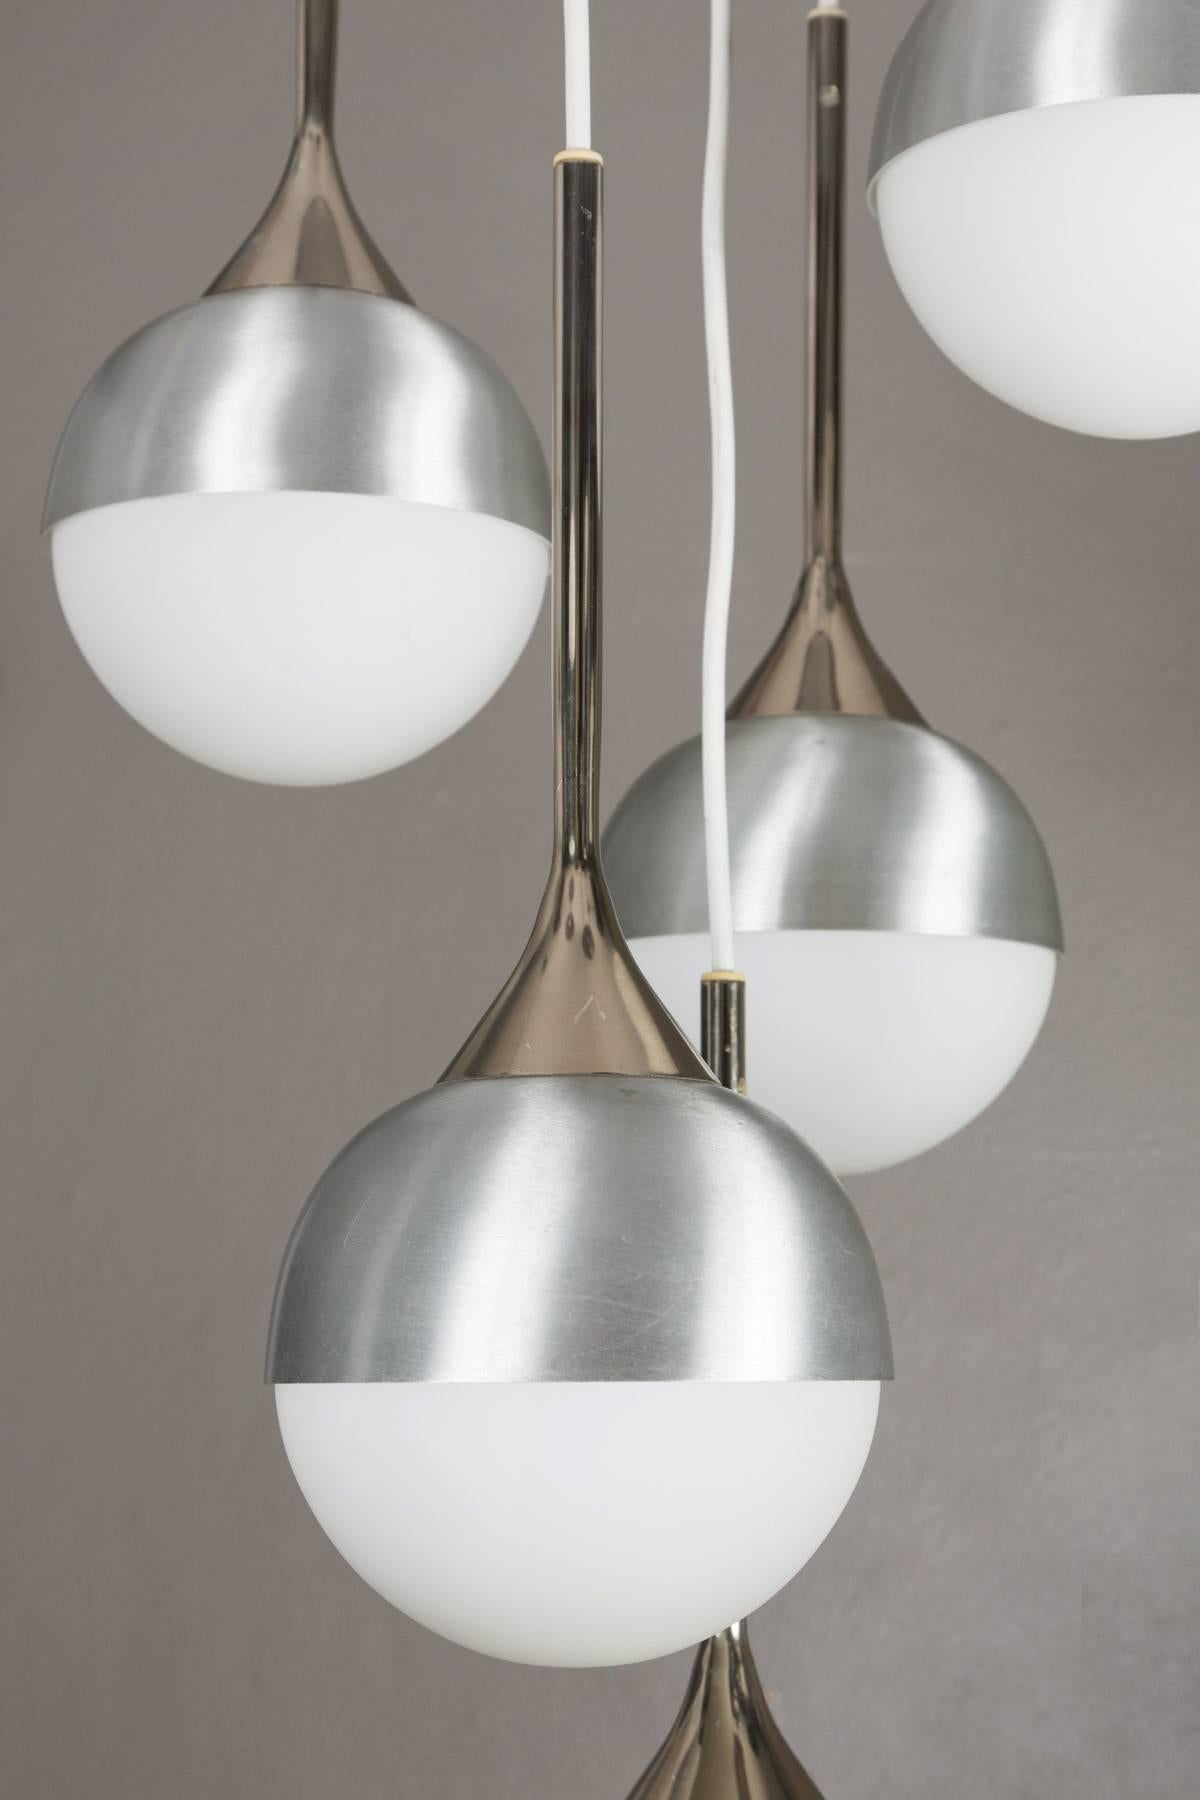 1960s five-globe chandelier attributed to Stilnovo. A quintessentially late 1960s Italian design executed in matte finish opaline glass, brushed metal and chrome with original architectural ceiling canopy. A highly functional cascading light